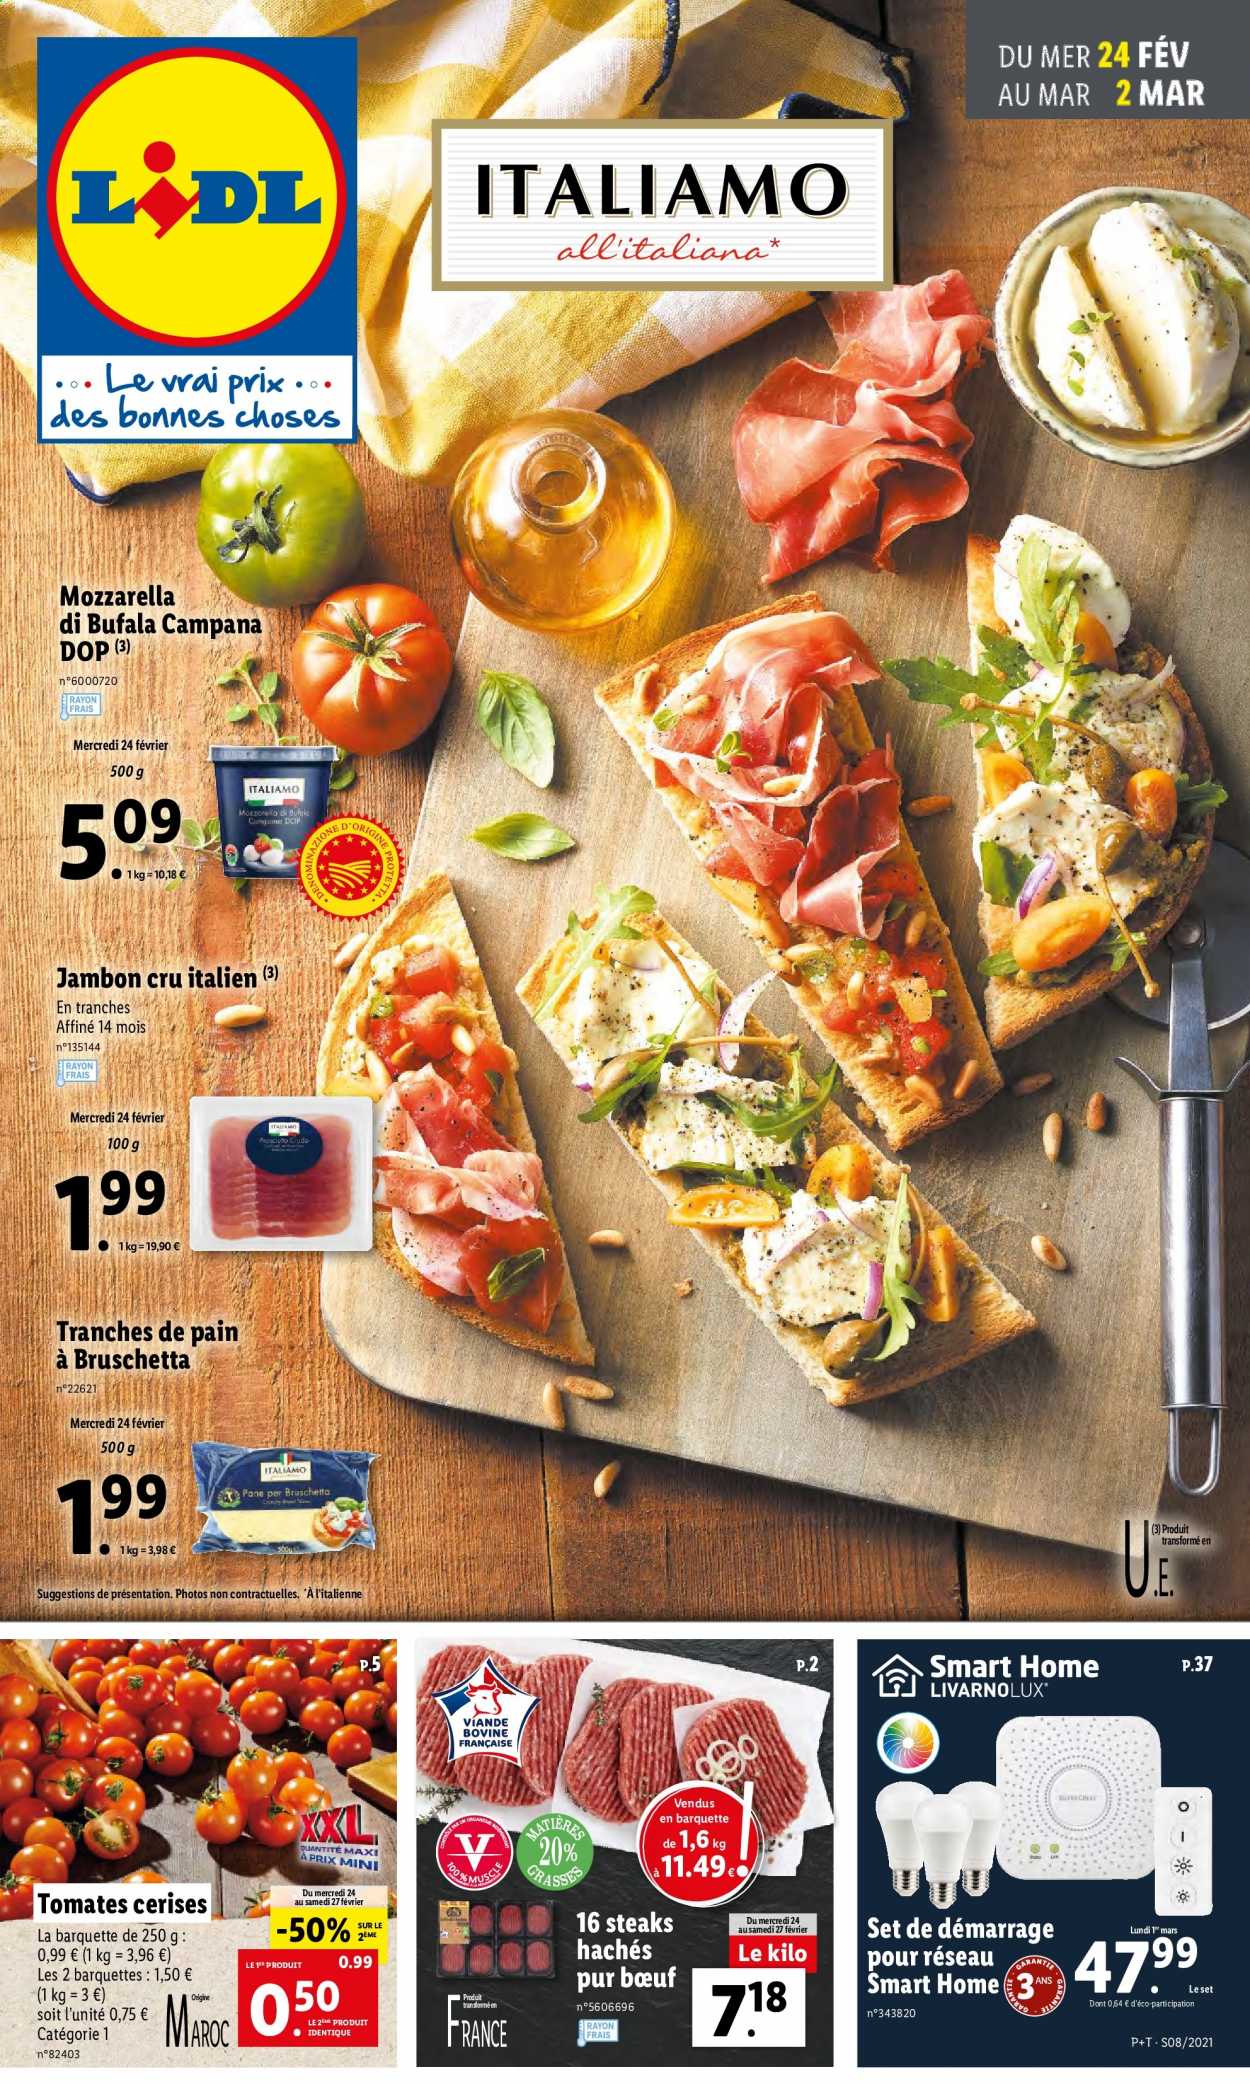 Catalogue Lidl - 24.02.2021 - 02.03.2021. Page 1.